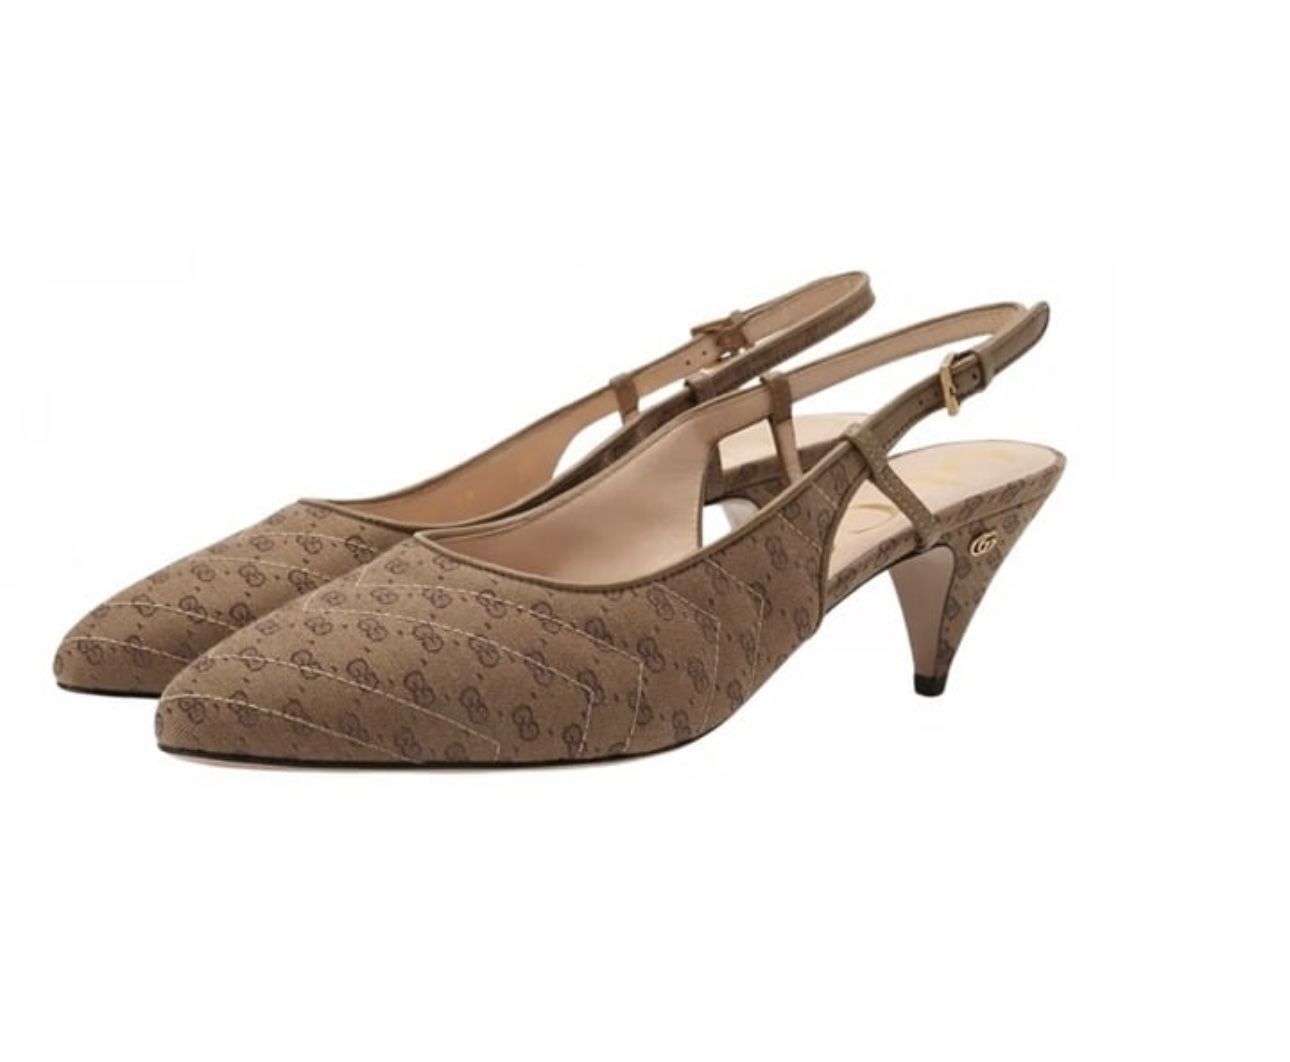 Gucci Double G Slingback Shoes Size 37